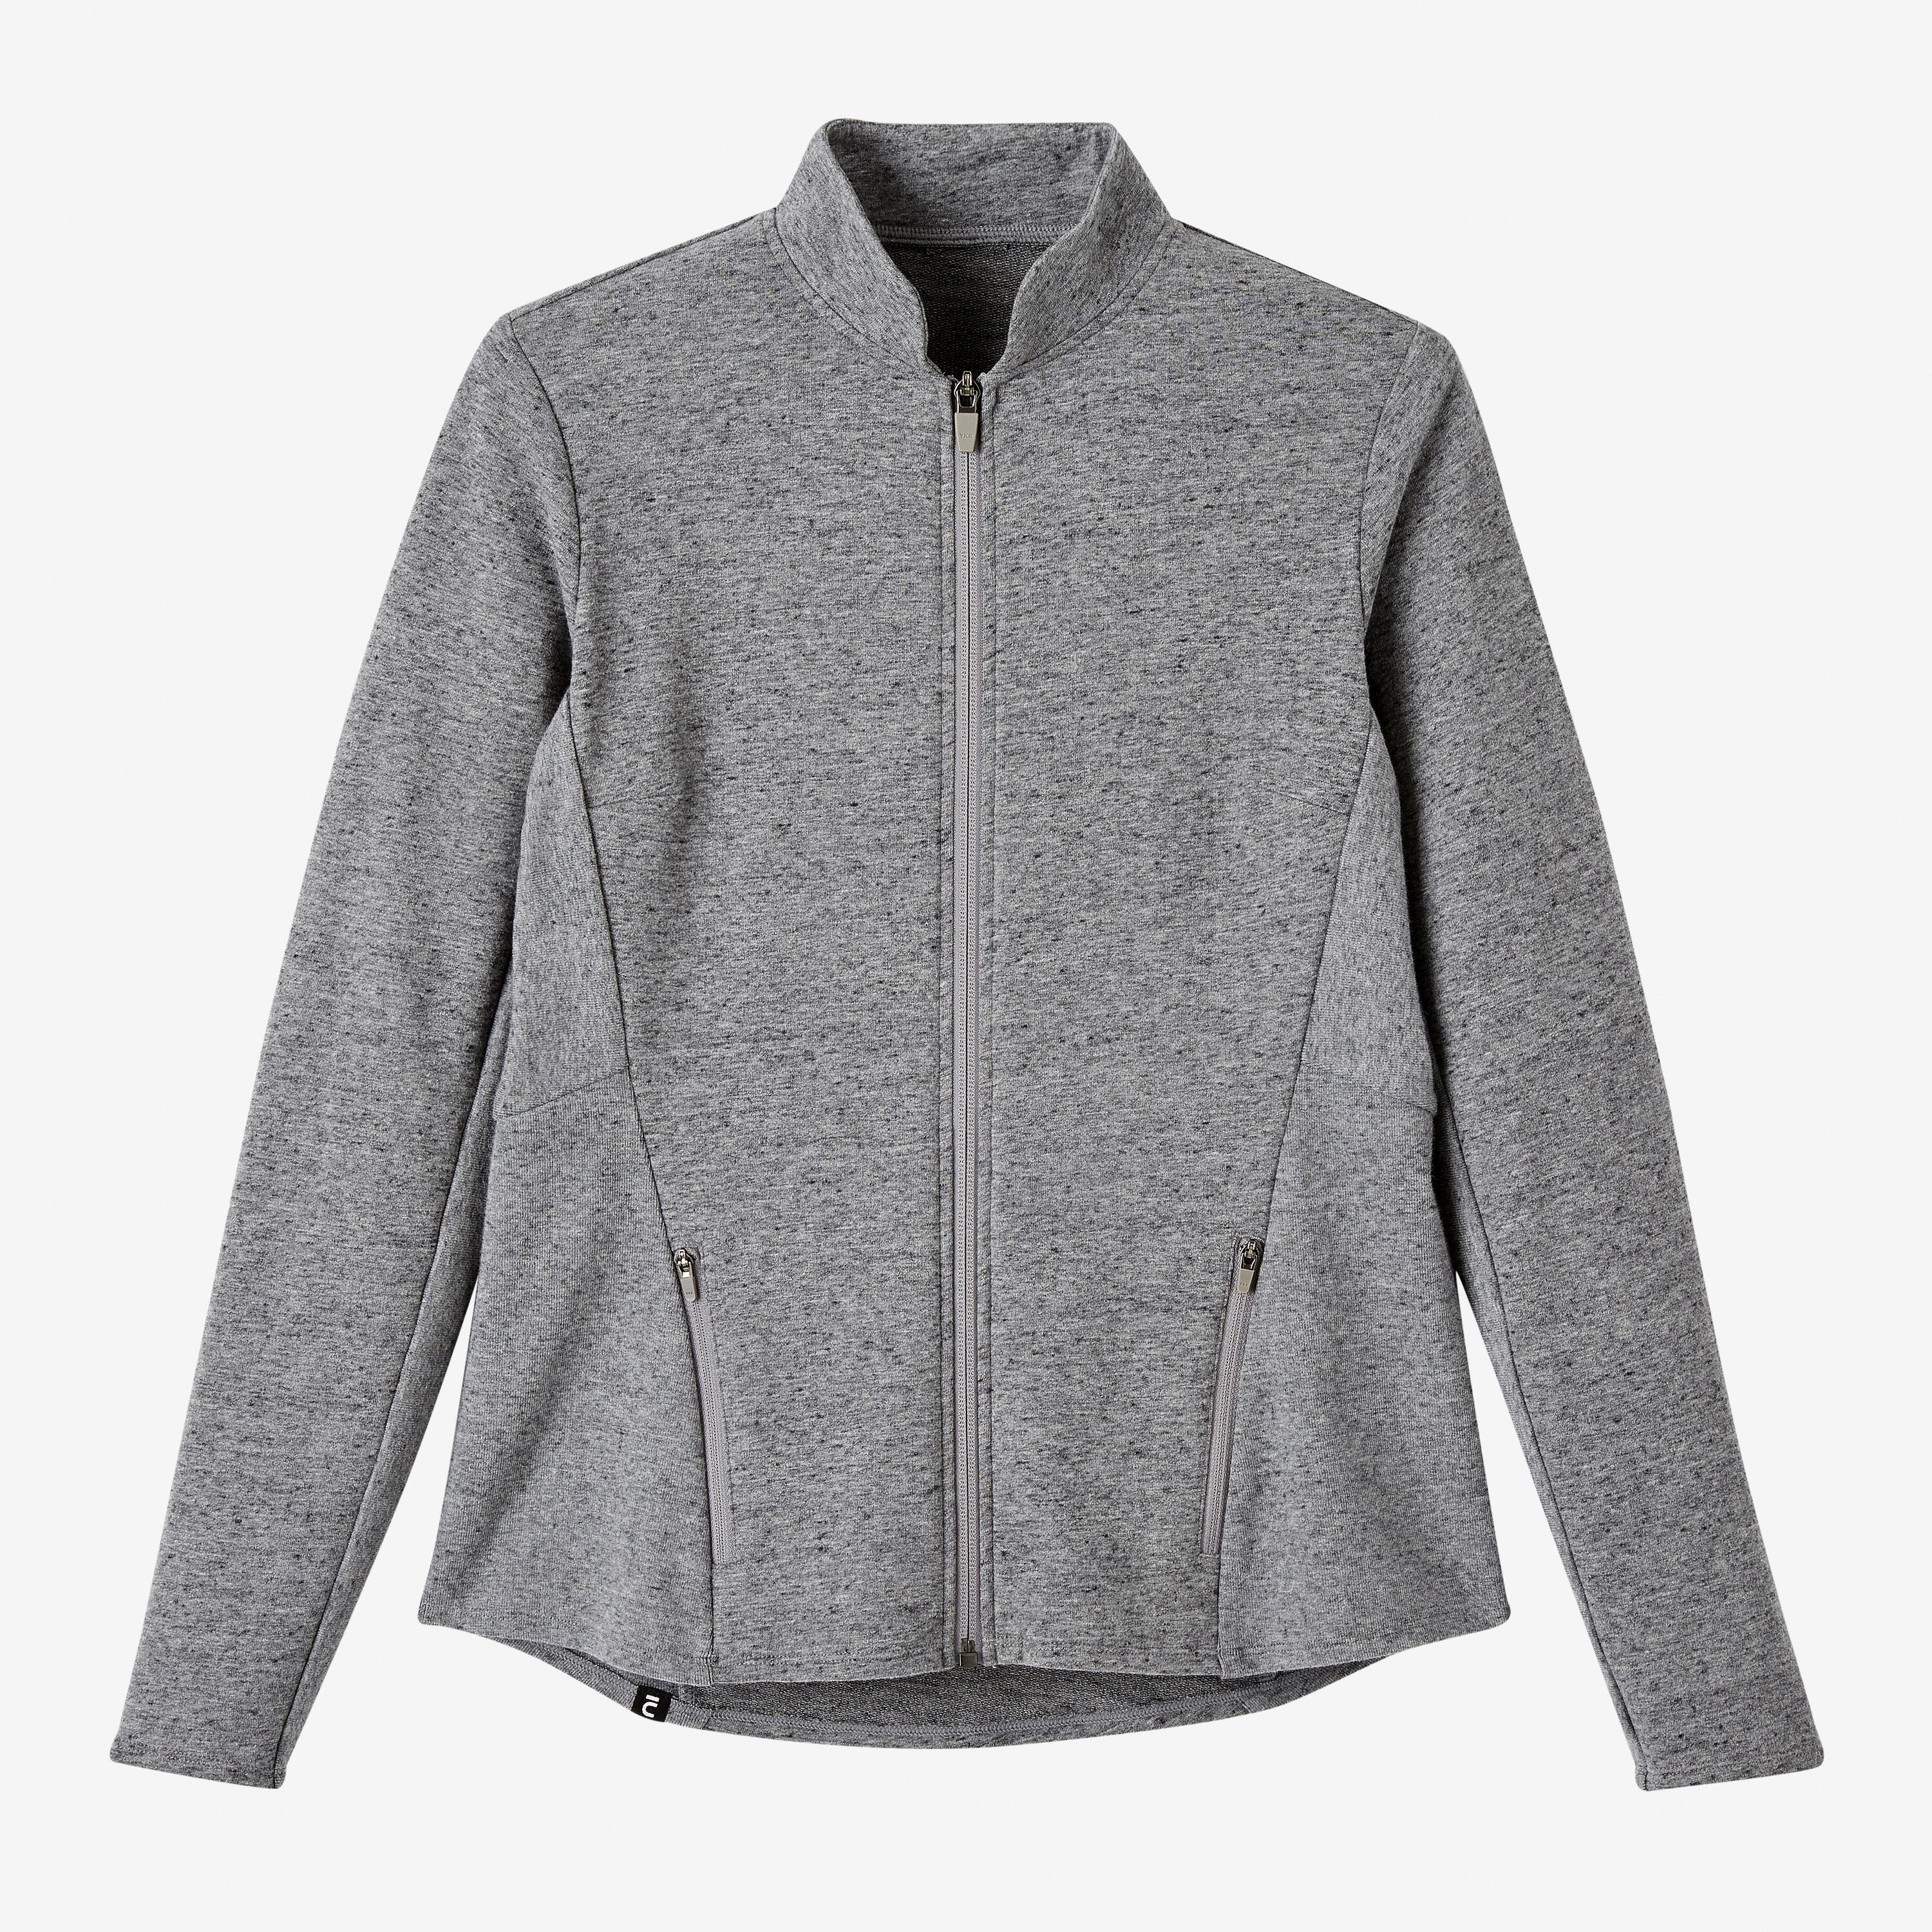 Women's Fitted High Neck Zipped Sweatshirt With Pocket 520 - Grey 7/7